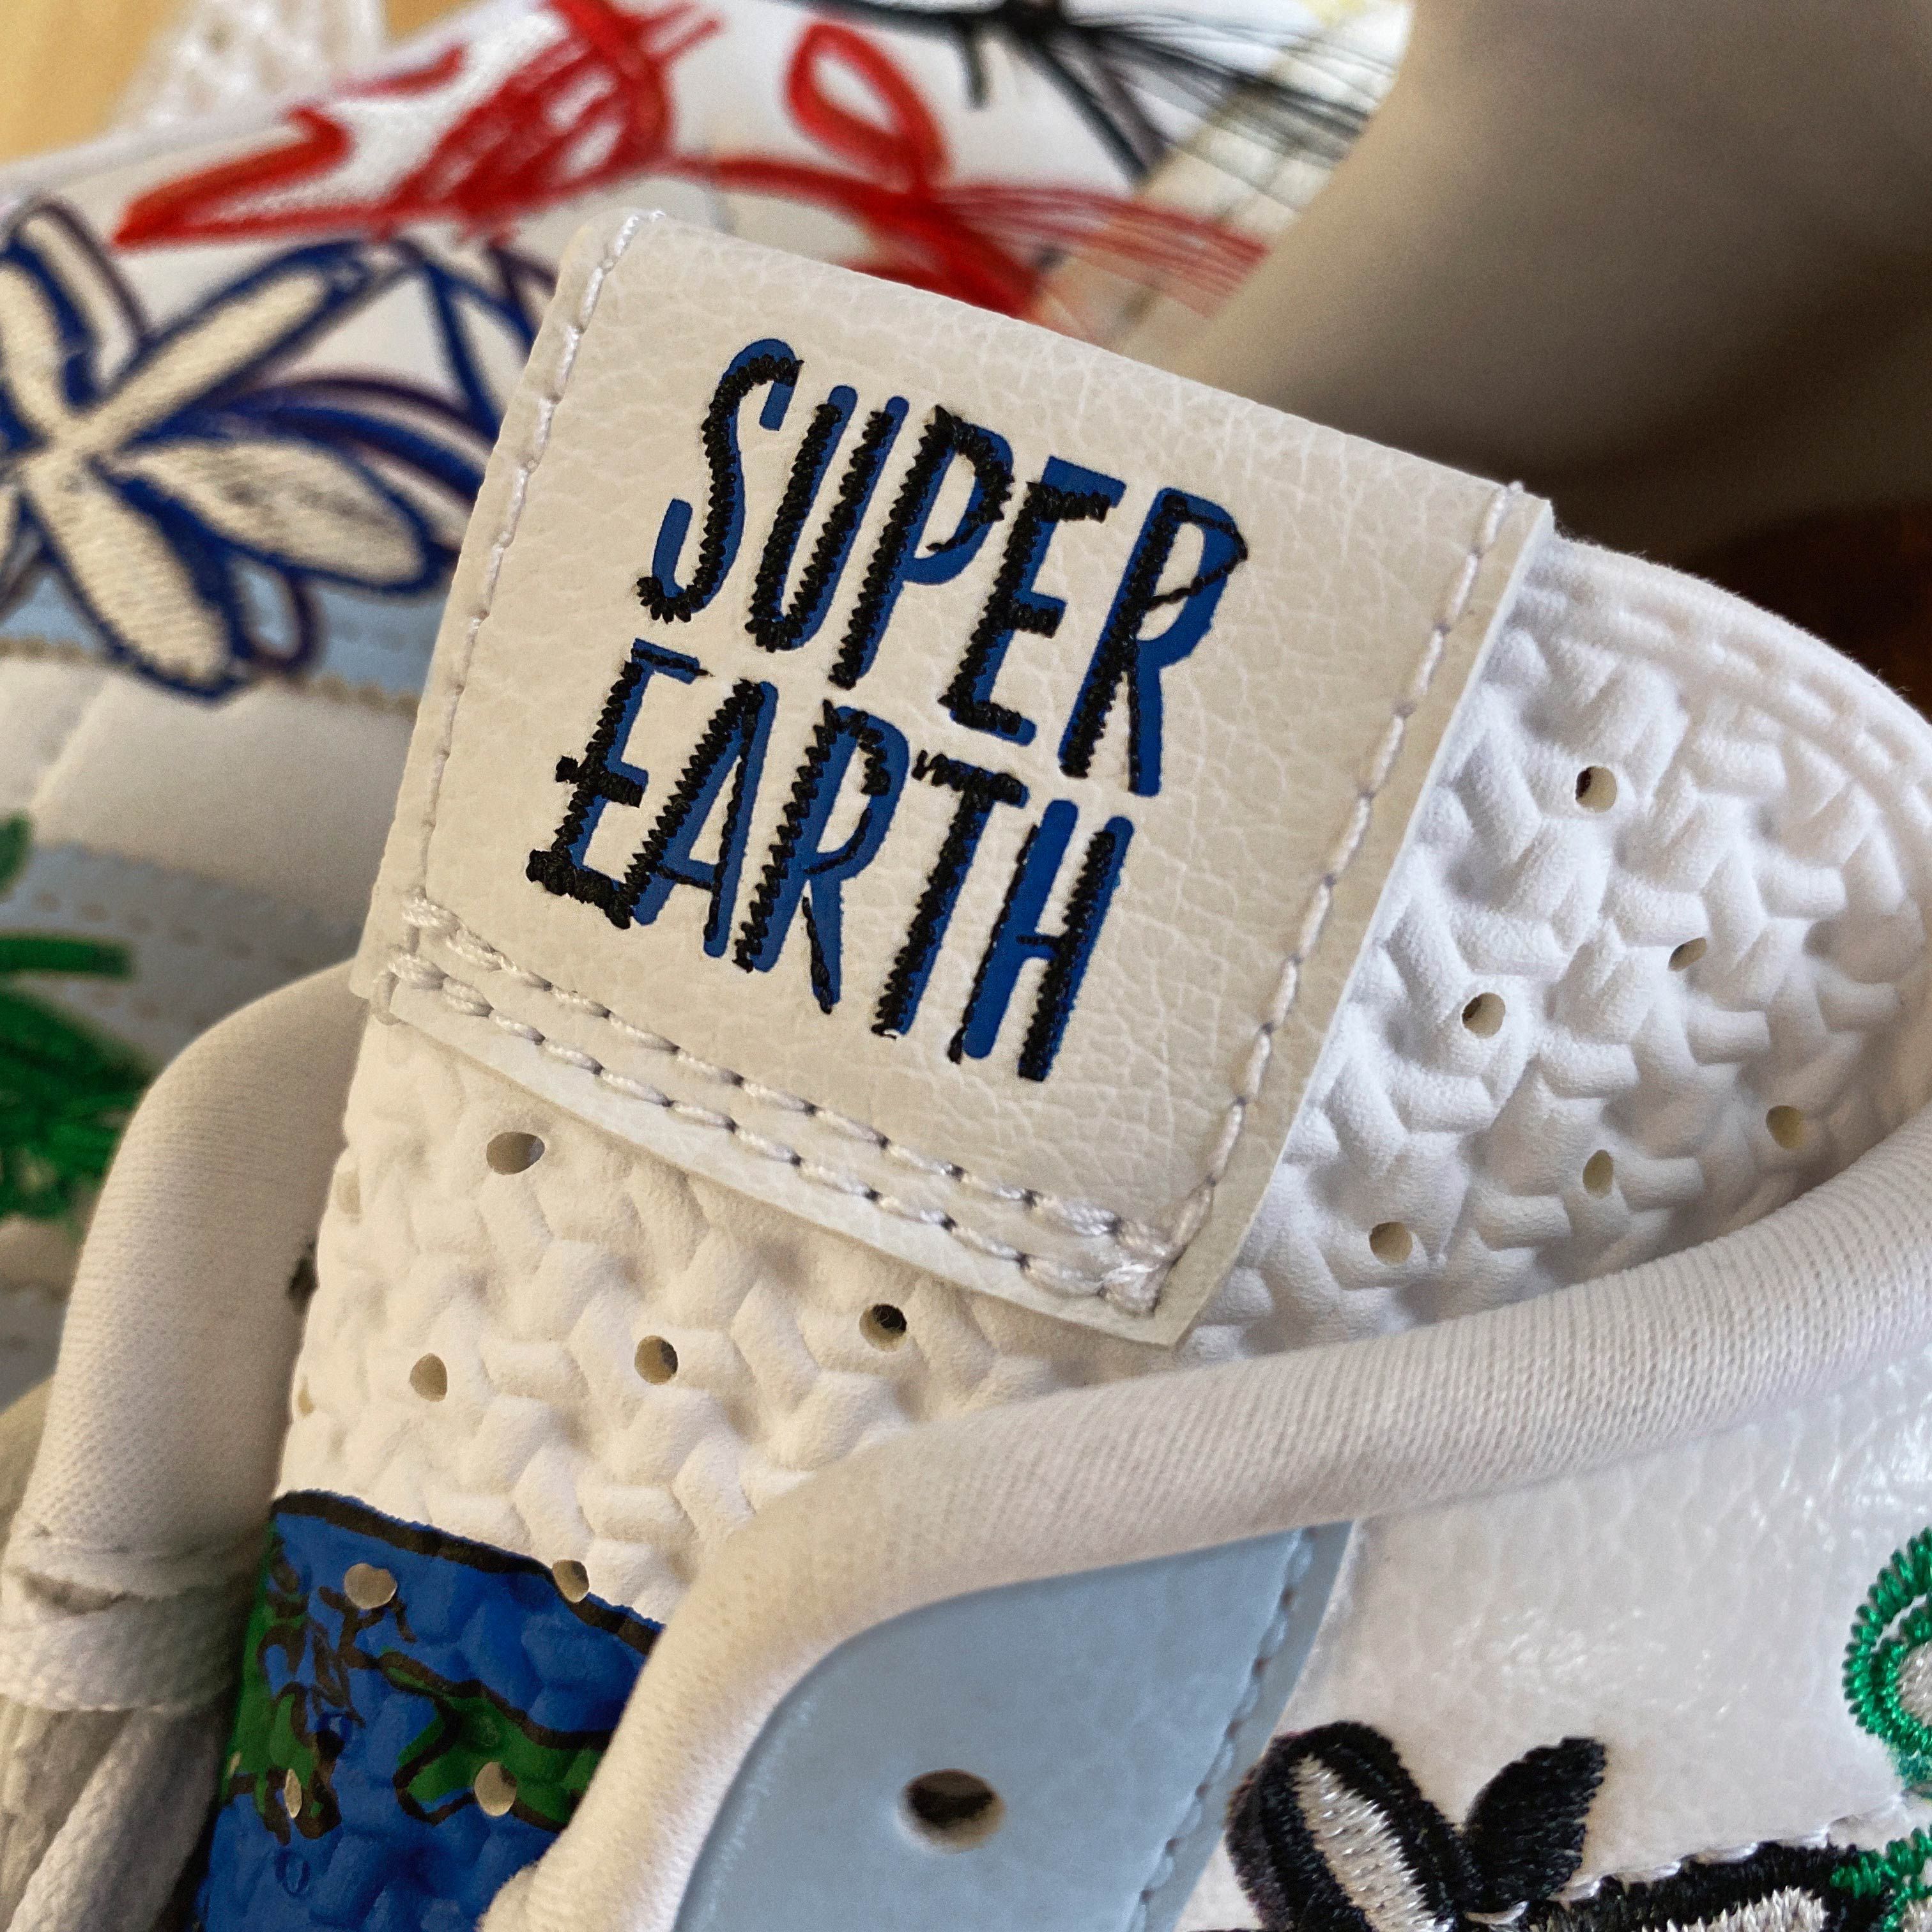 SUPEREARTH Superstar: Championing Responsible Design with Sean Wotherspoon